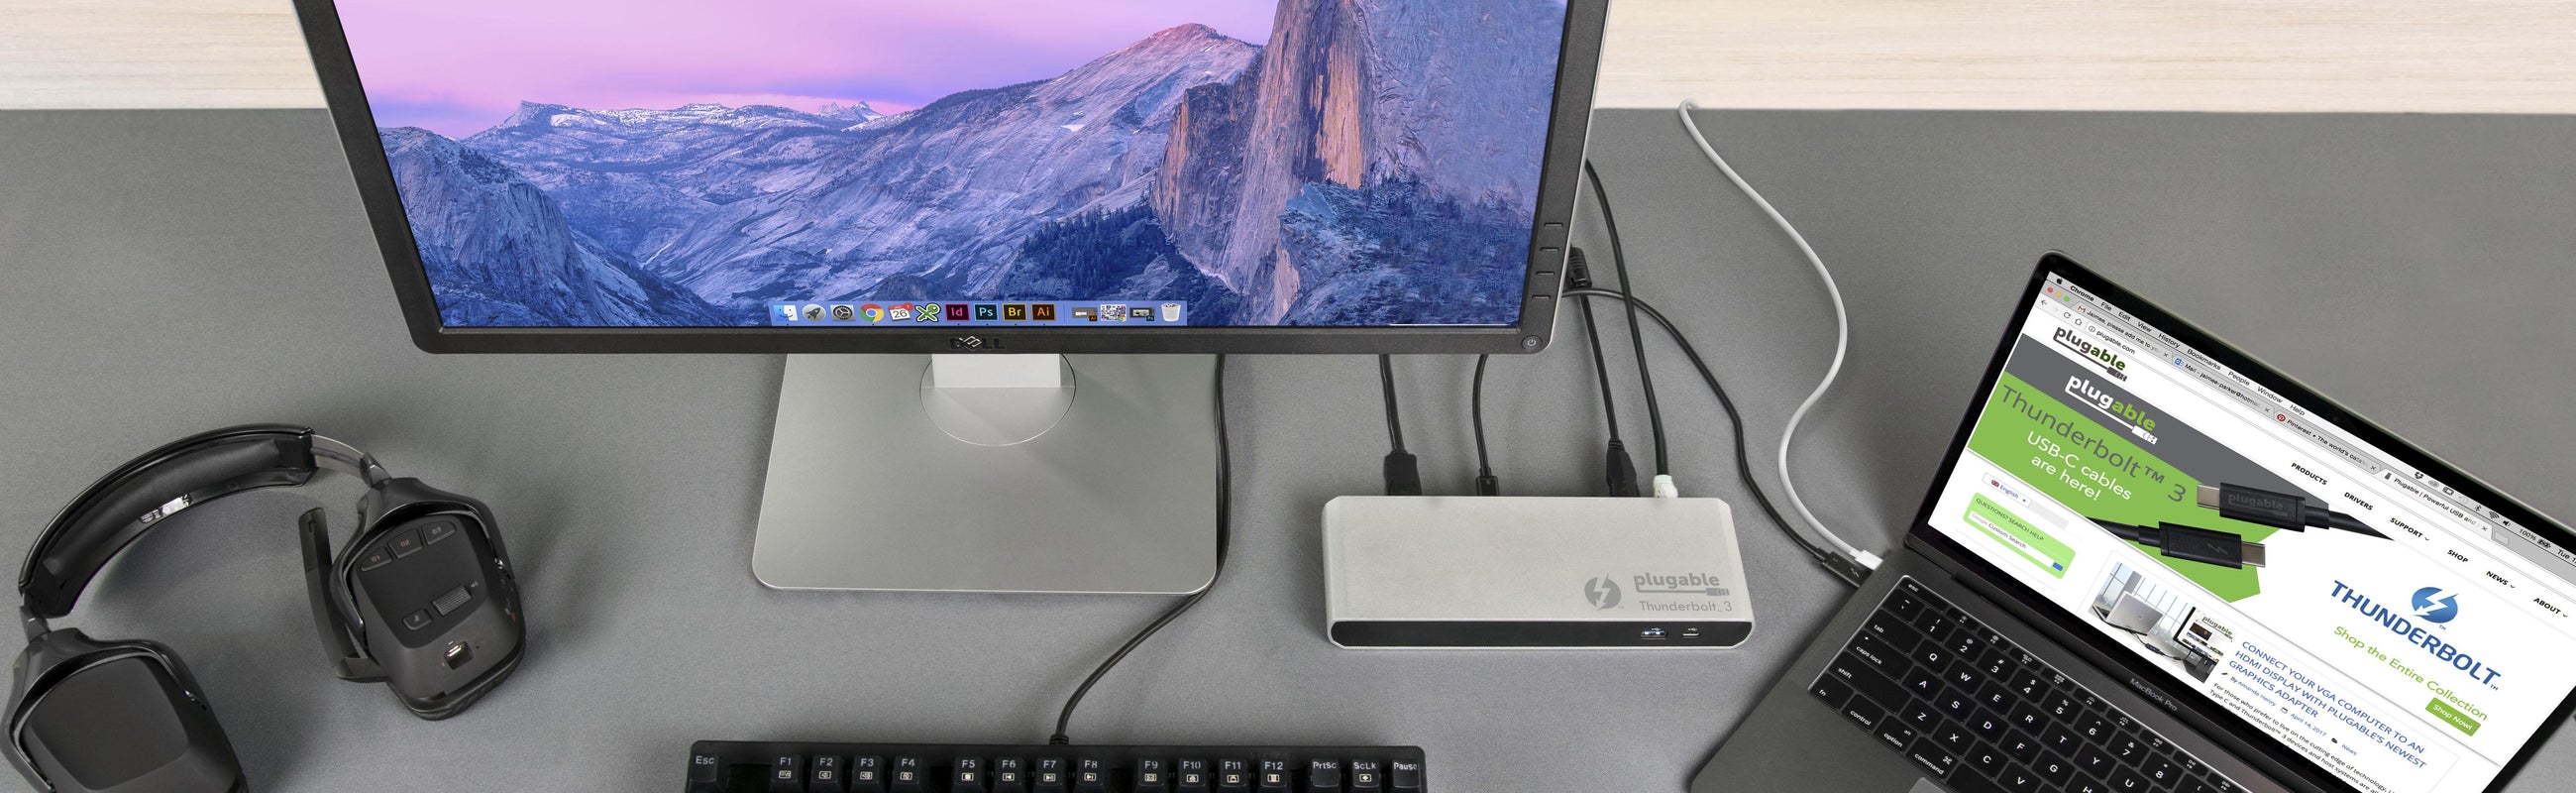 The TBT3-UD1-83 Thunderbolt Single Display dock plugged into a monitor with a laptop host, mouse, keyboard, mobile phone and pear of headphones